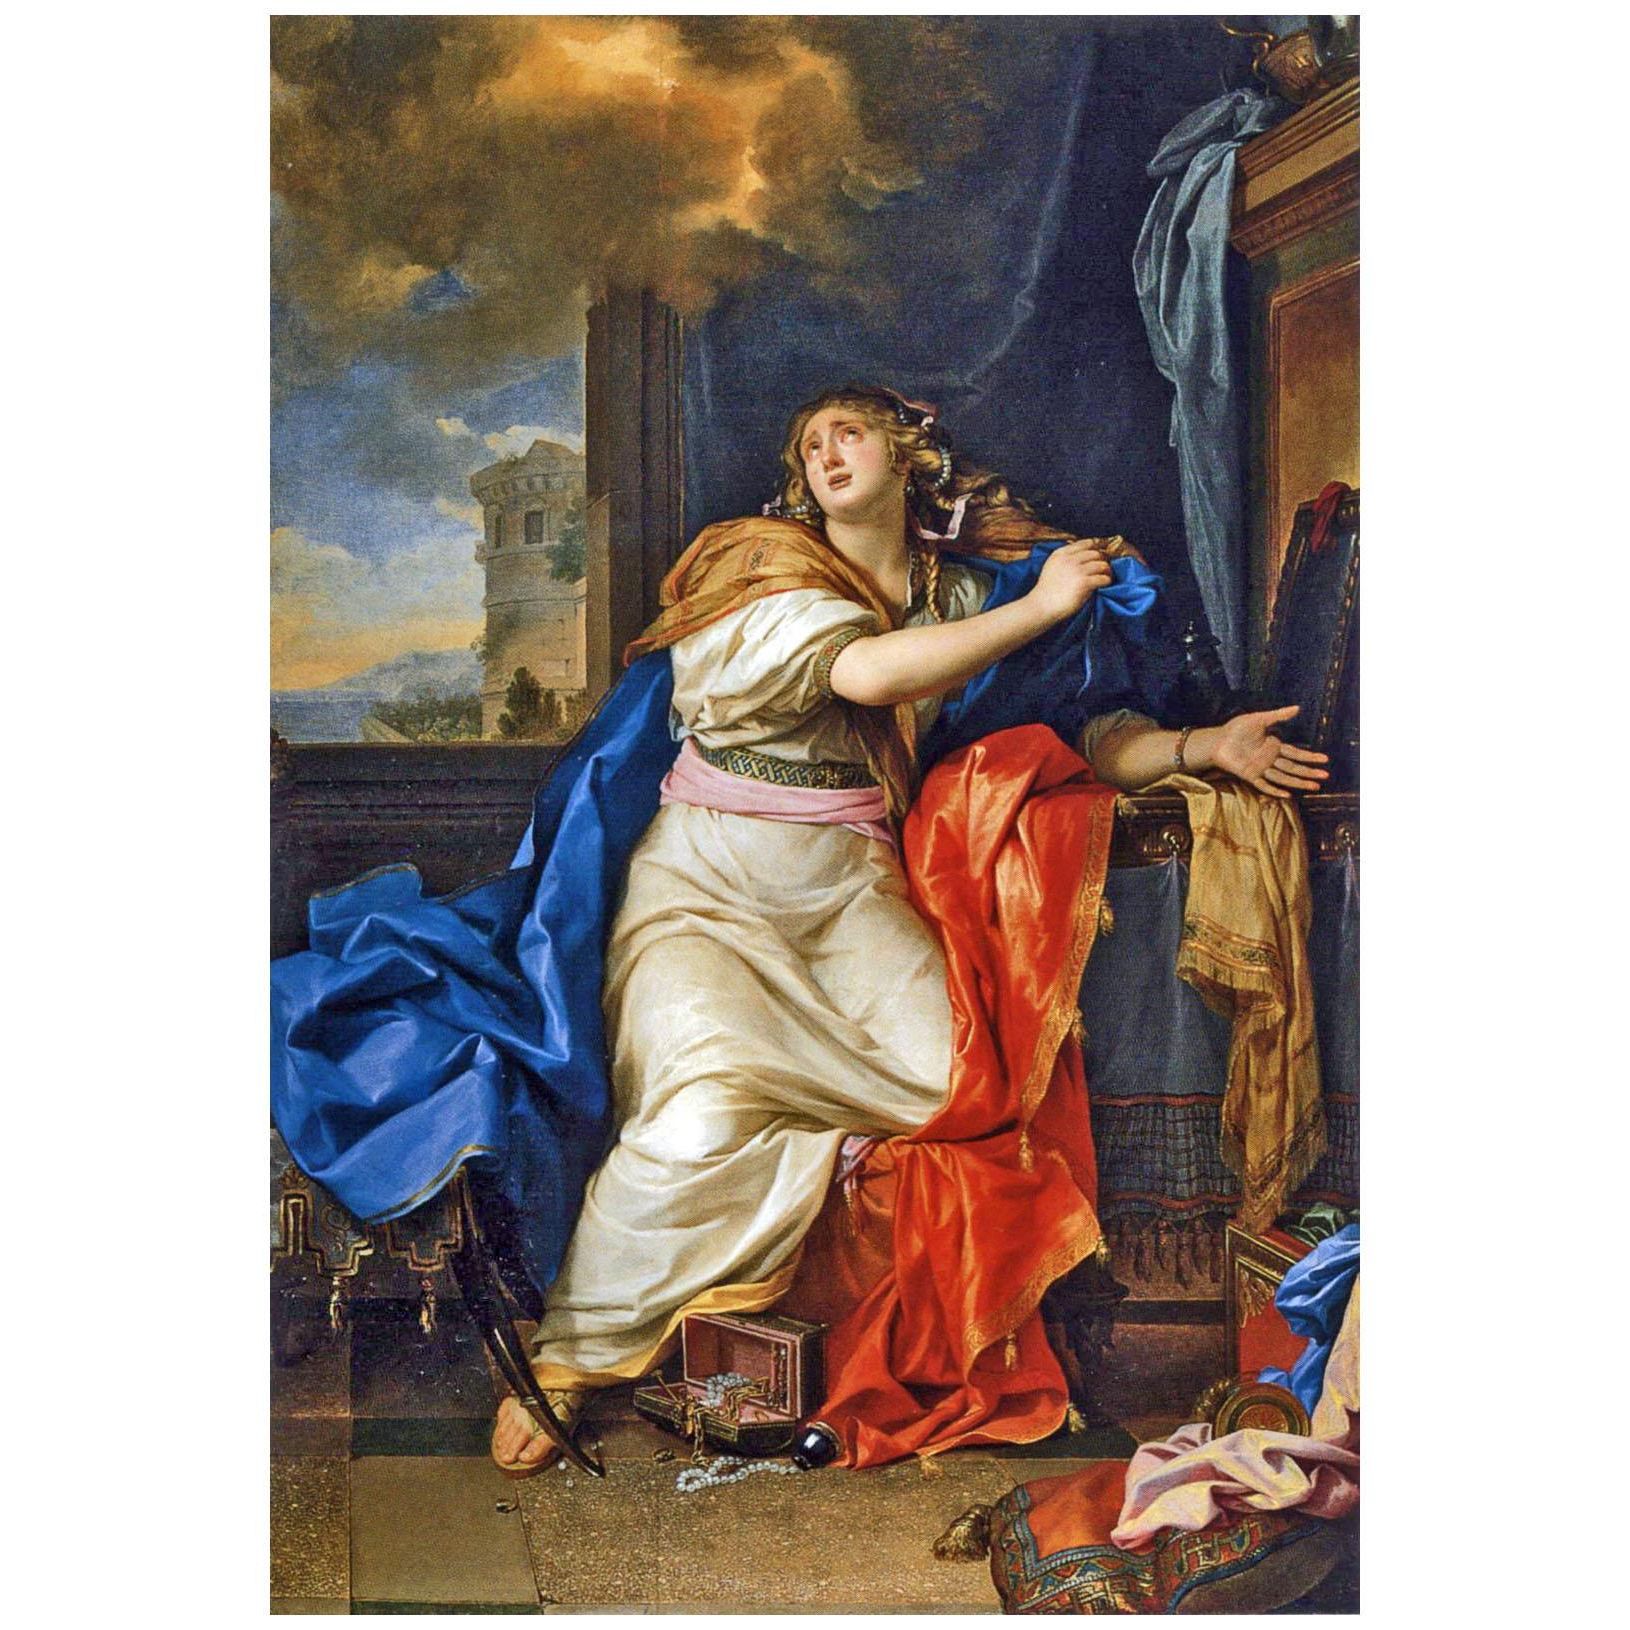 Charles Le Brun. Marie Madeleine repentante. 1656. Louvre